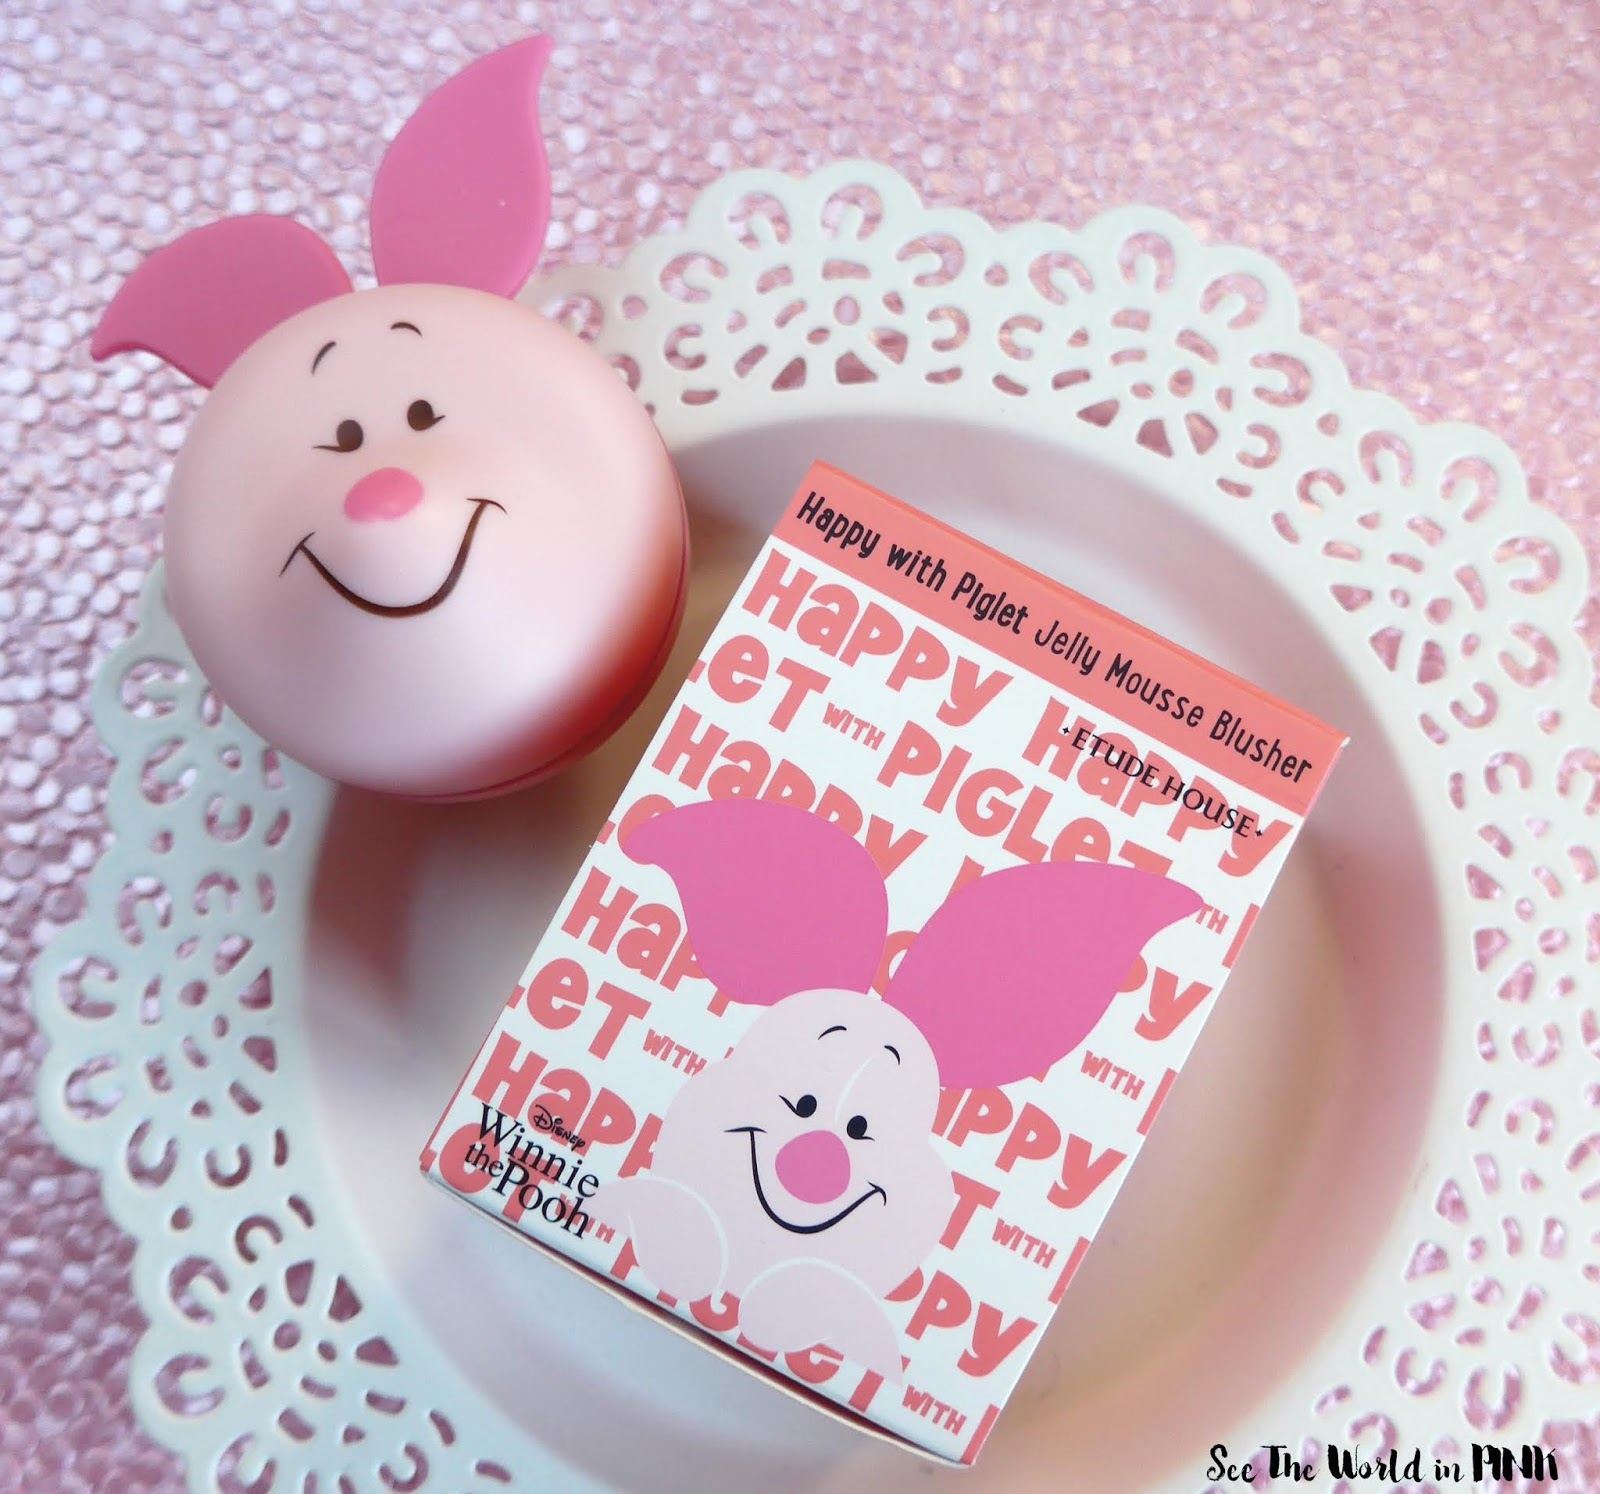 Etude House Happy With Piglet Jelly Mousse Blusher and Liquid Lips Air Mousse 